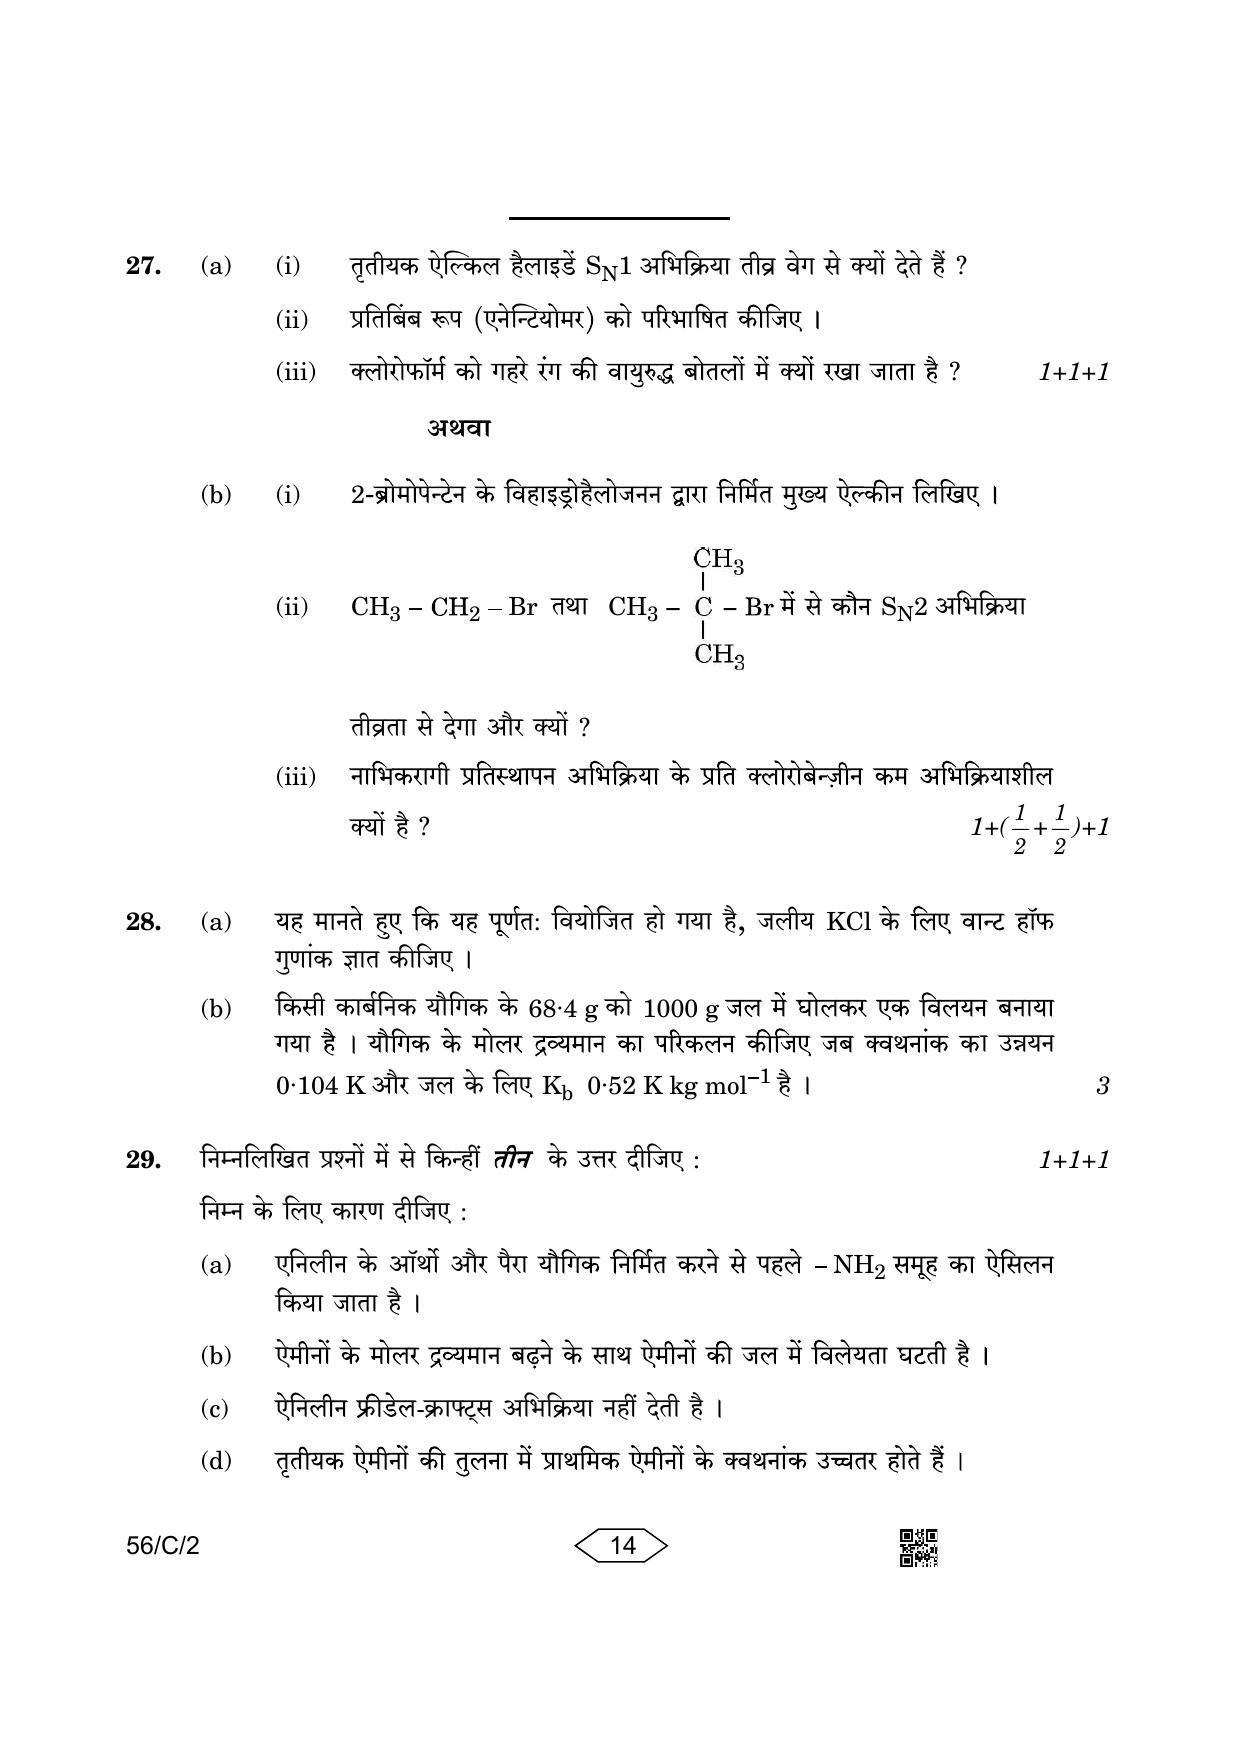 CBSE Class 12 56-2 Chemistry 2023 (Compartment) Question Paper - Page 14